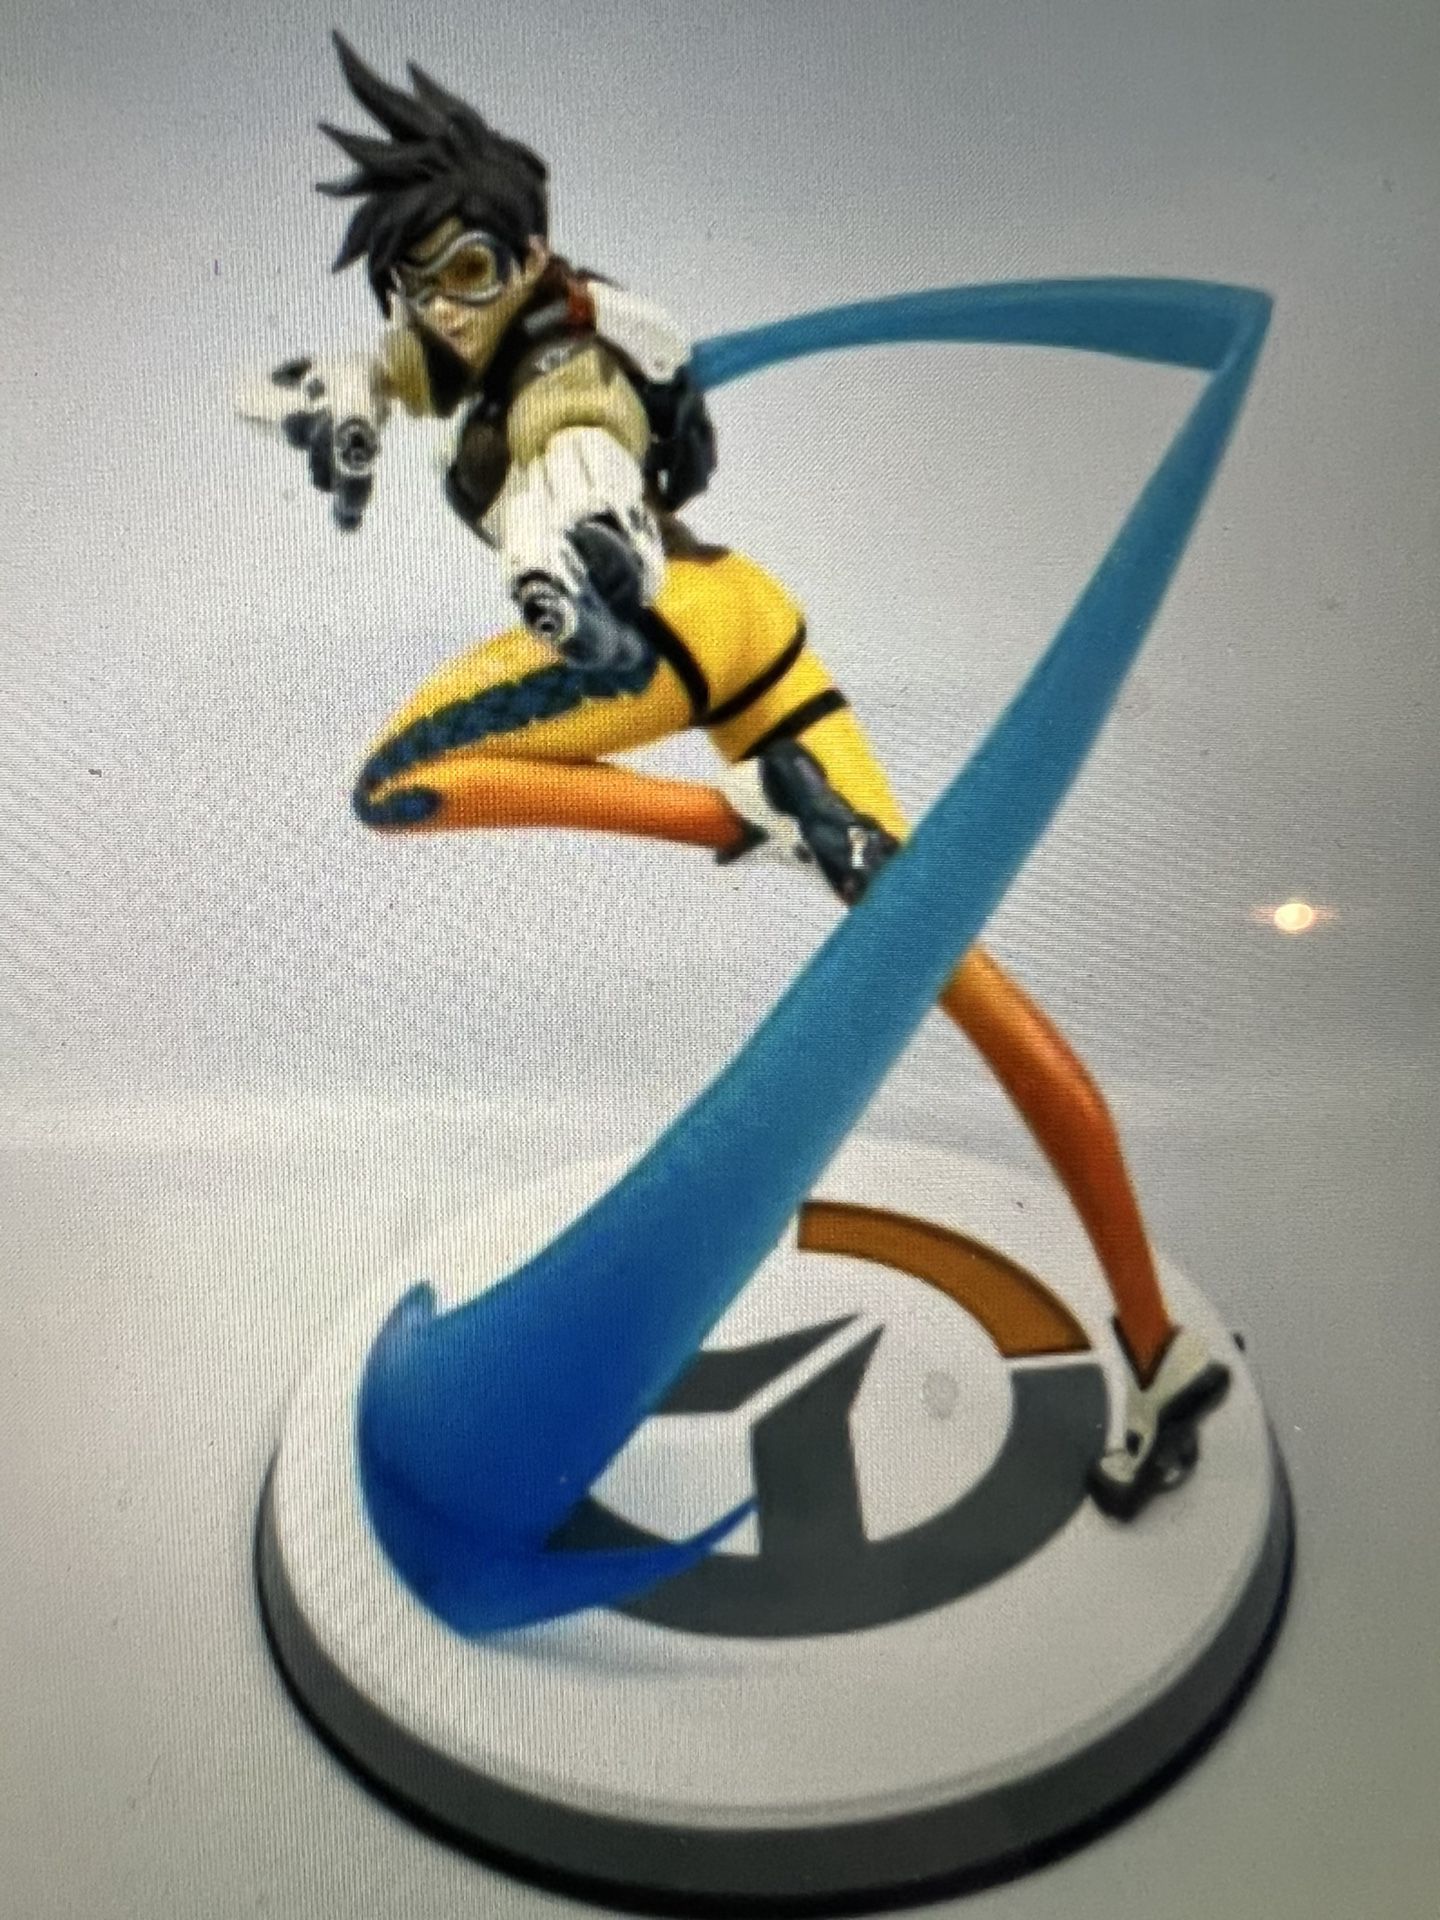 Blizzard Overwatch Tracer V.1 Collectible Statue 